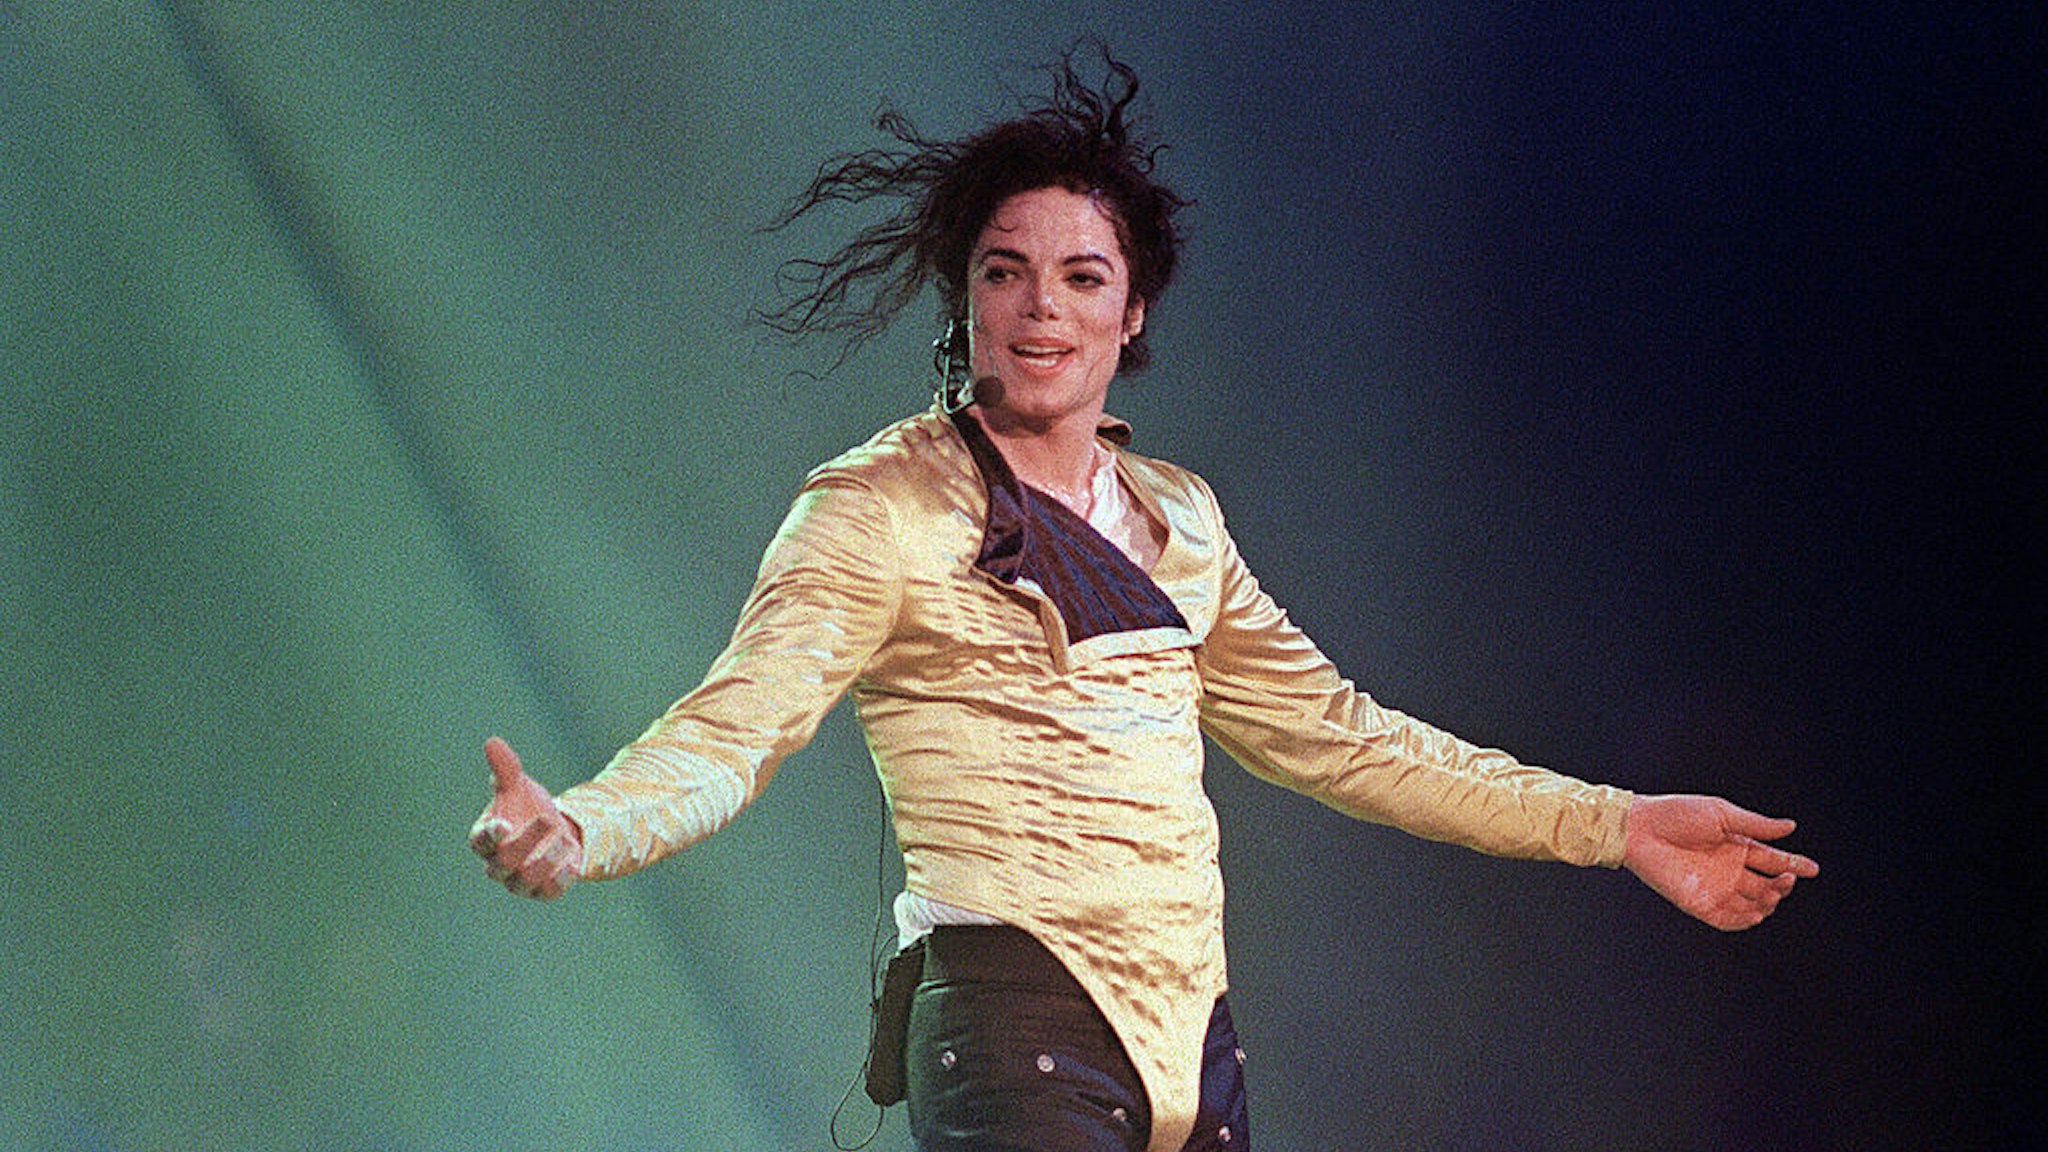 US pop star and entertainer Michael Jackson preforms before an estimated audience of 60,000 in Brunei on July 16, 1996.